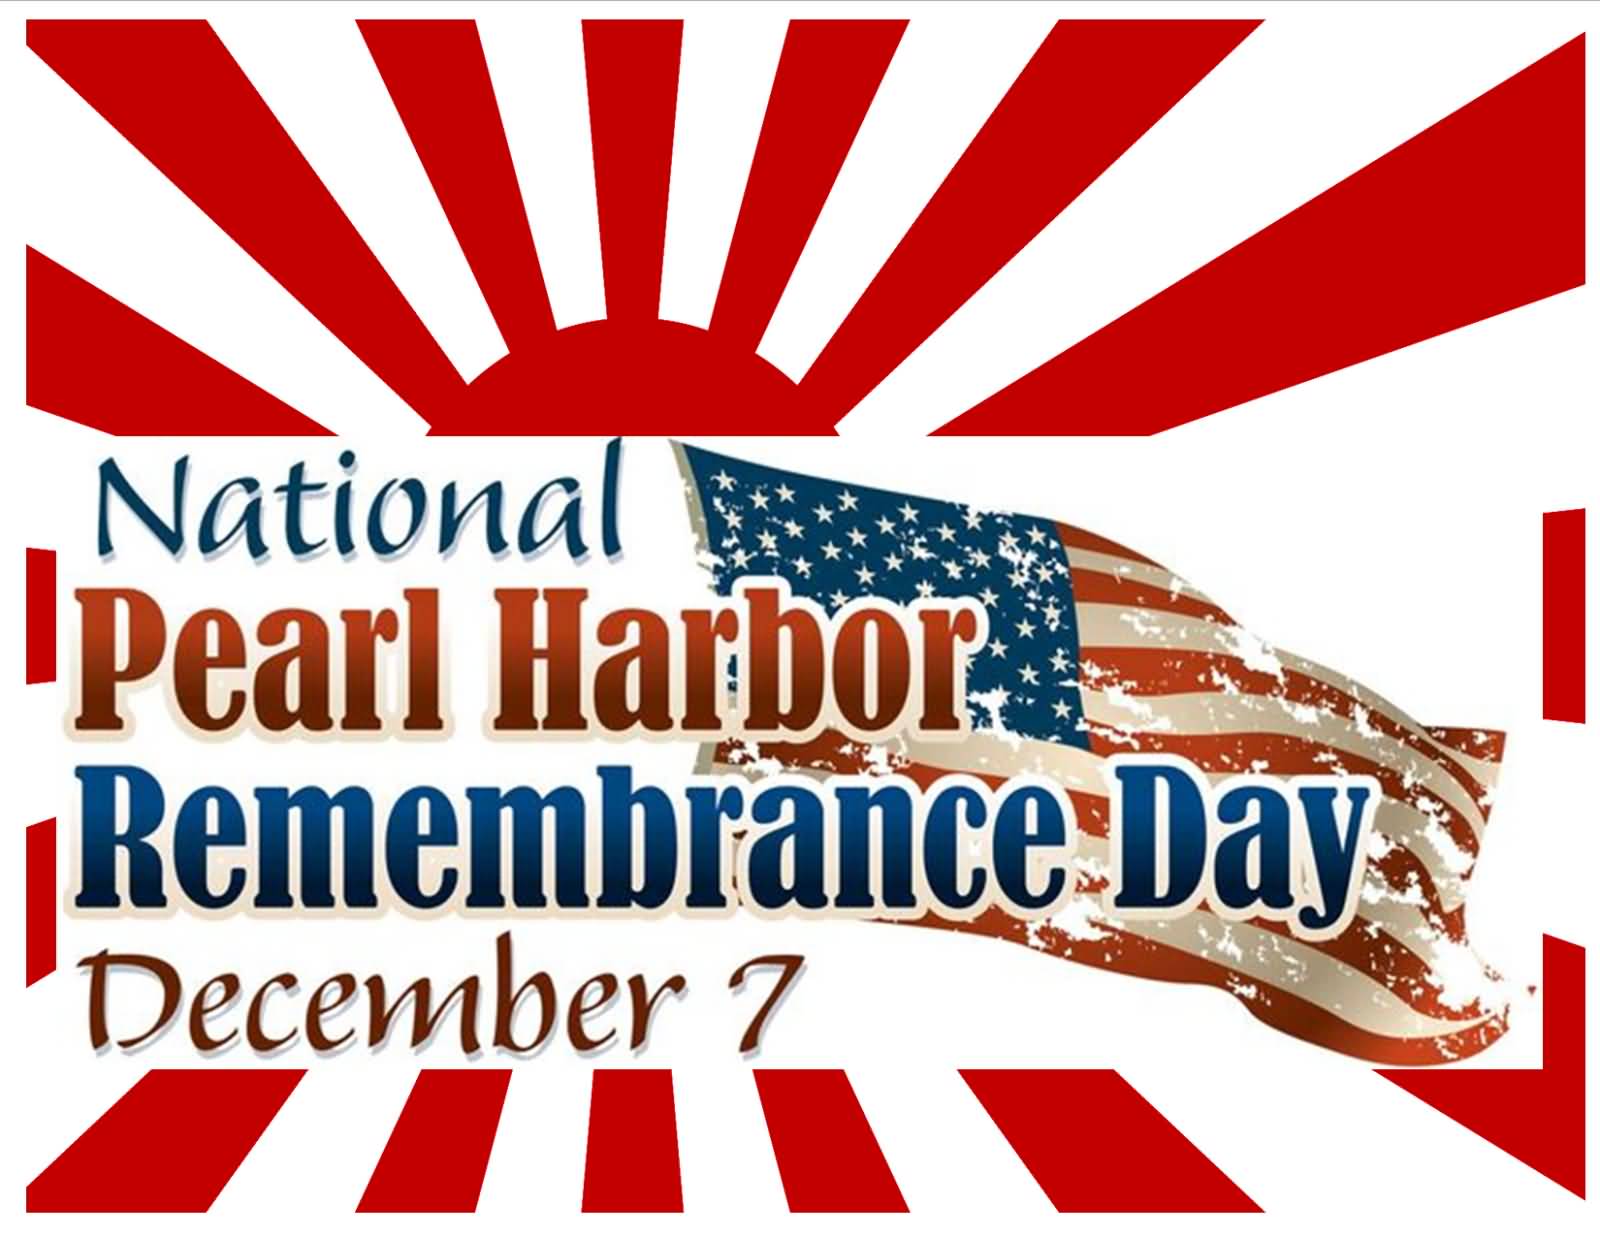 National Pearl Harbor Remembrance Day December 7 Photo For Facebook